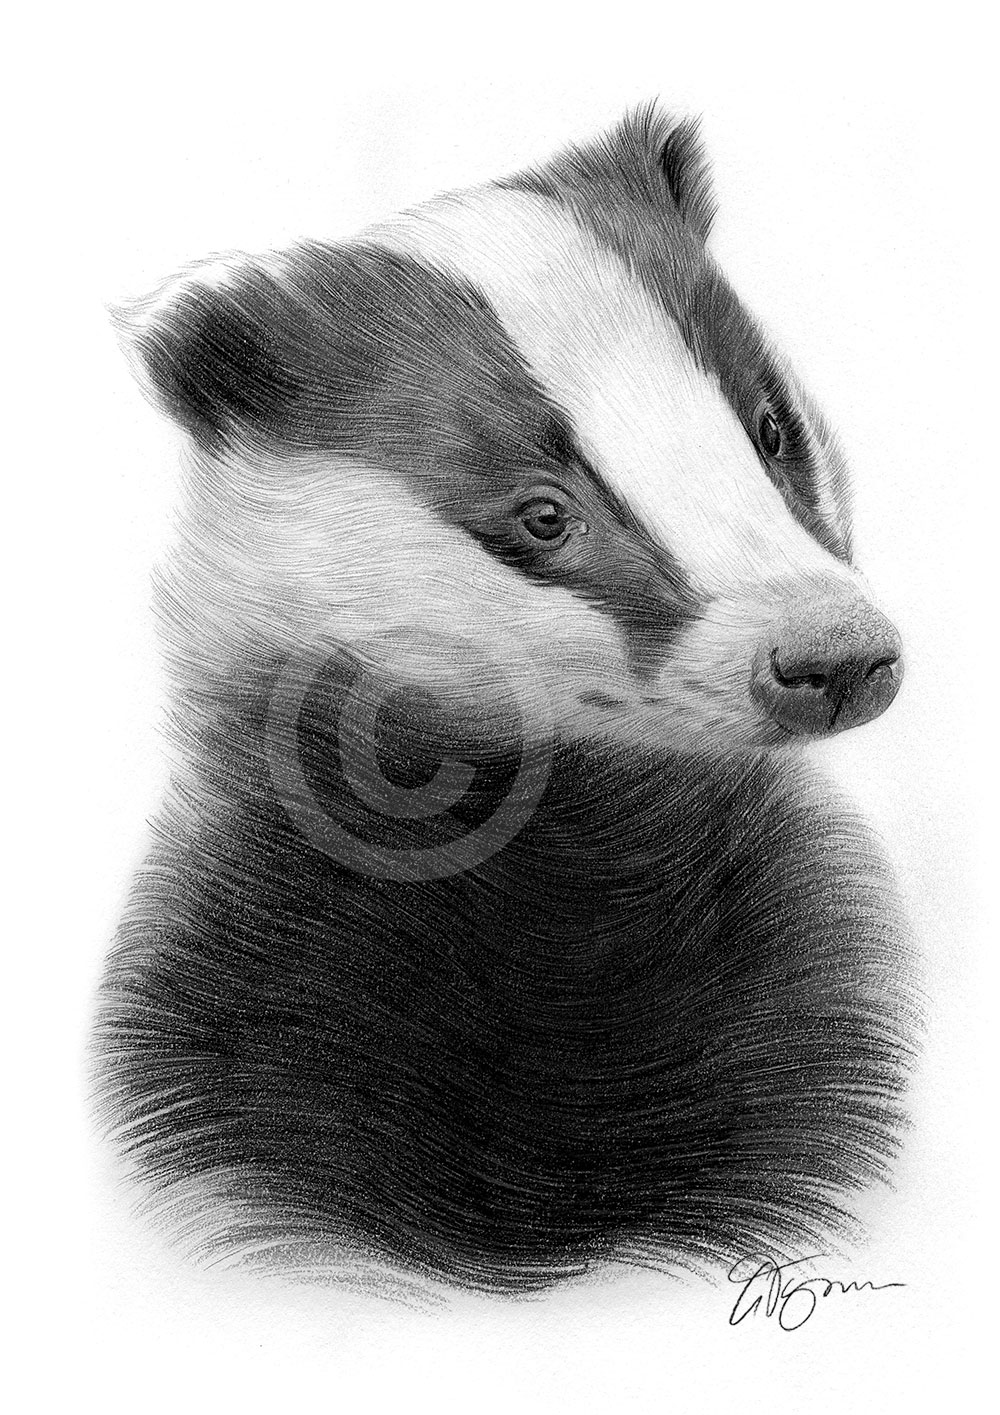 Pencil drawing of a young badger by artist Gary Tymon